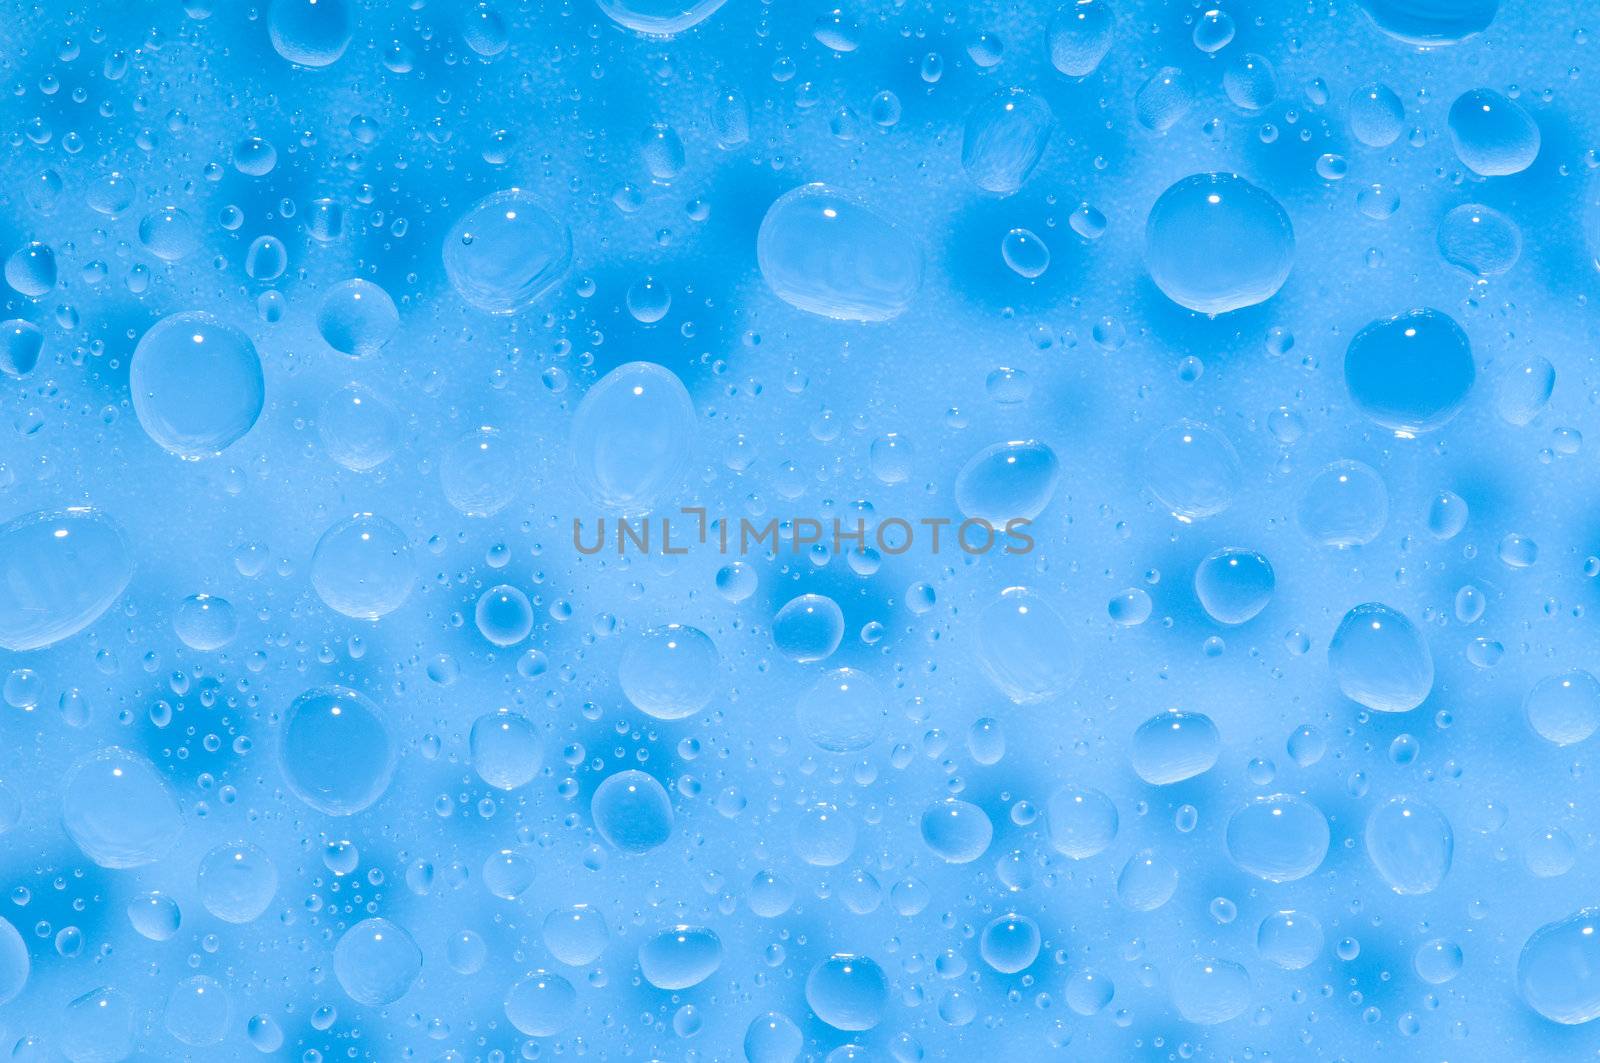 Water drops on a shiny surface in light blue